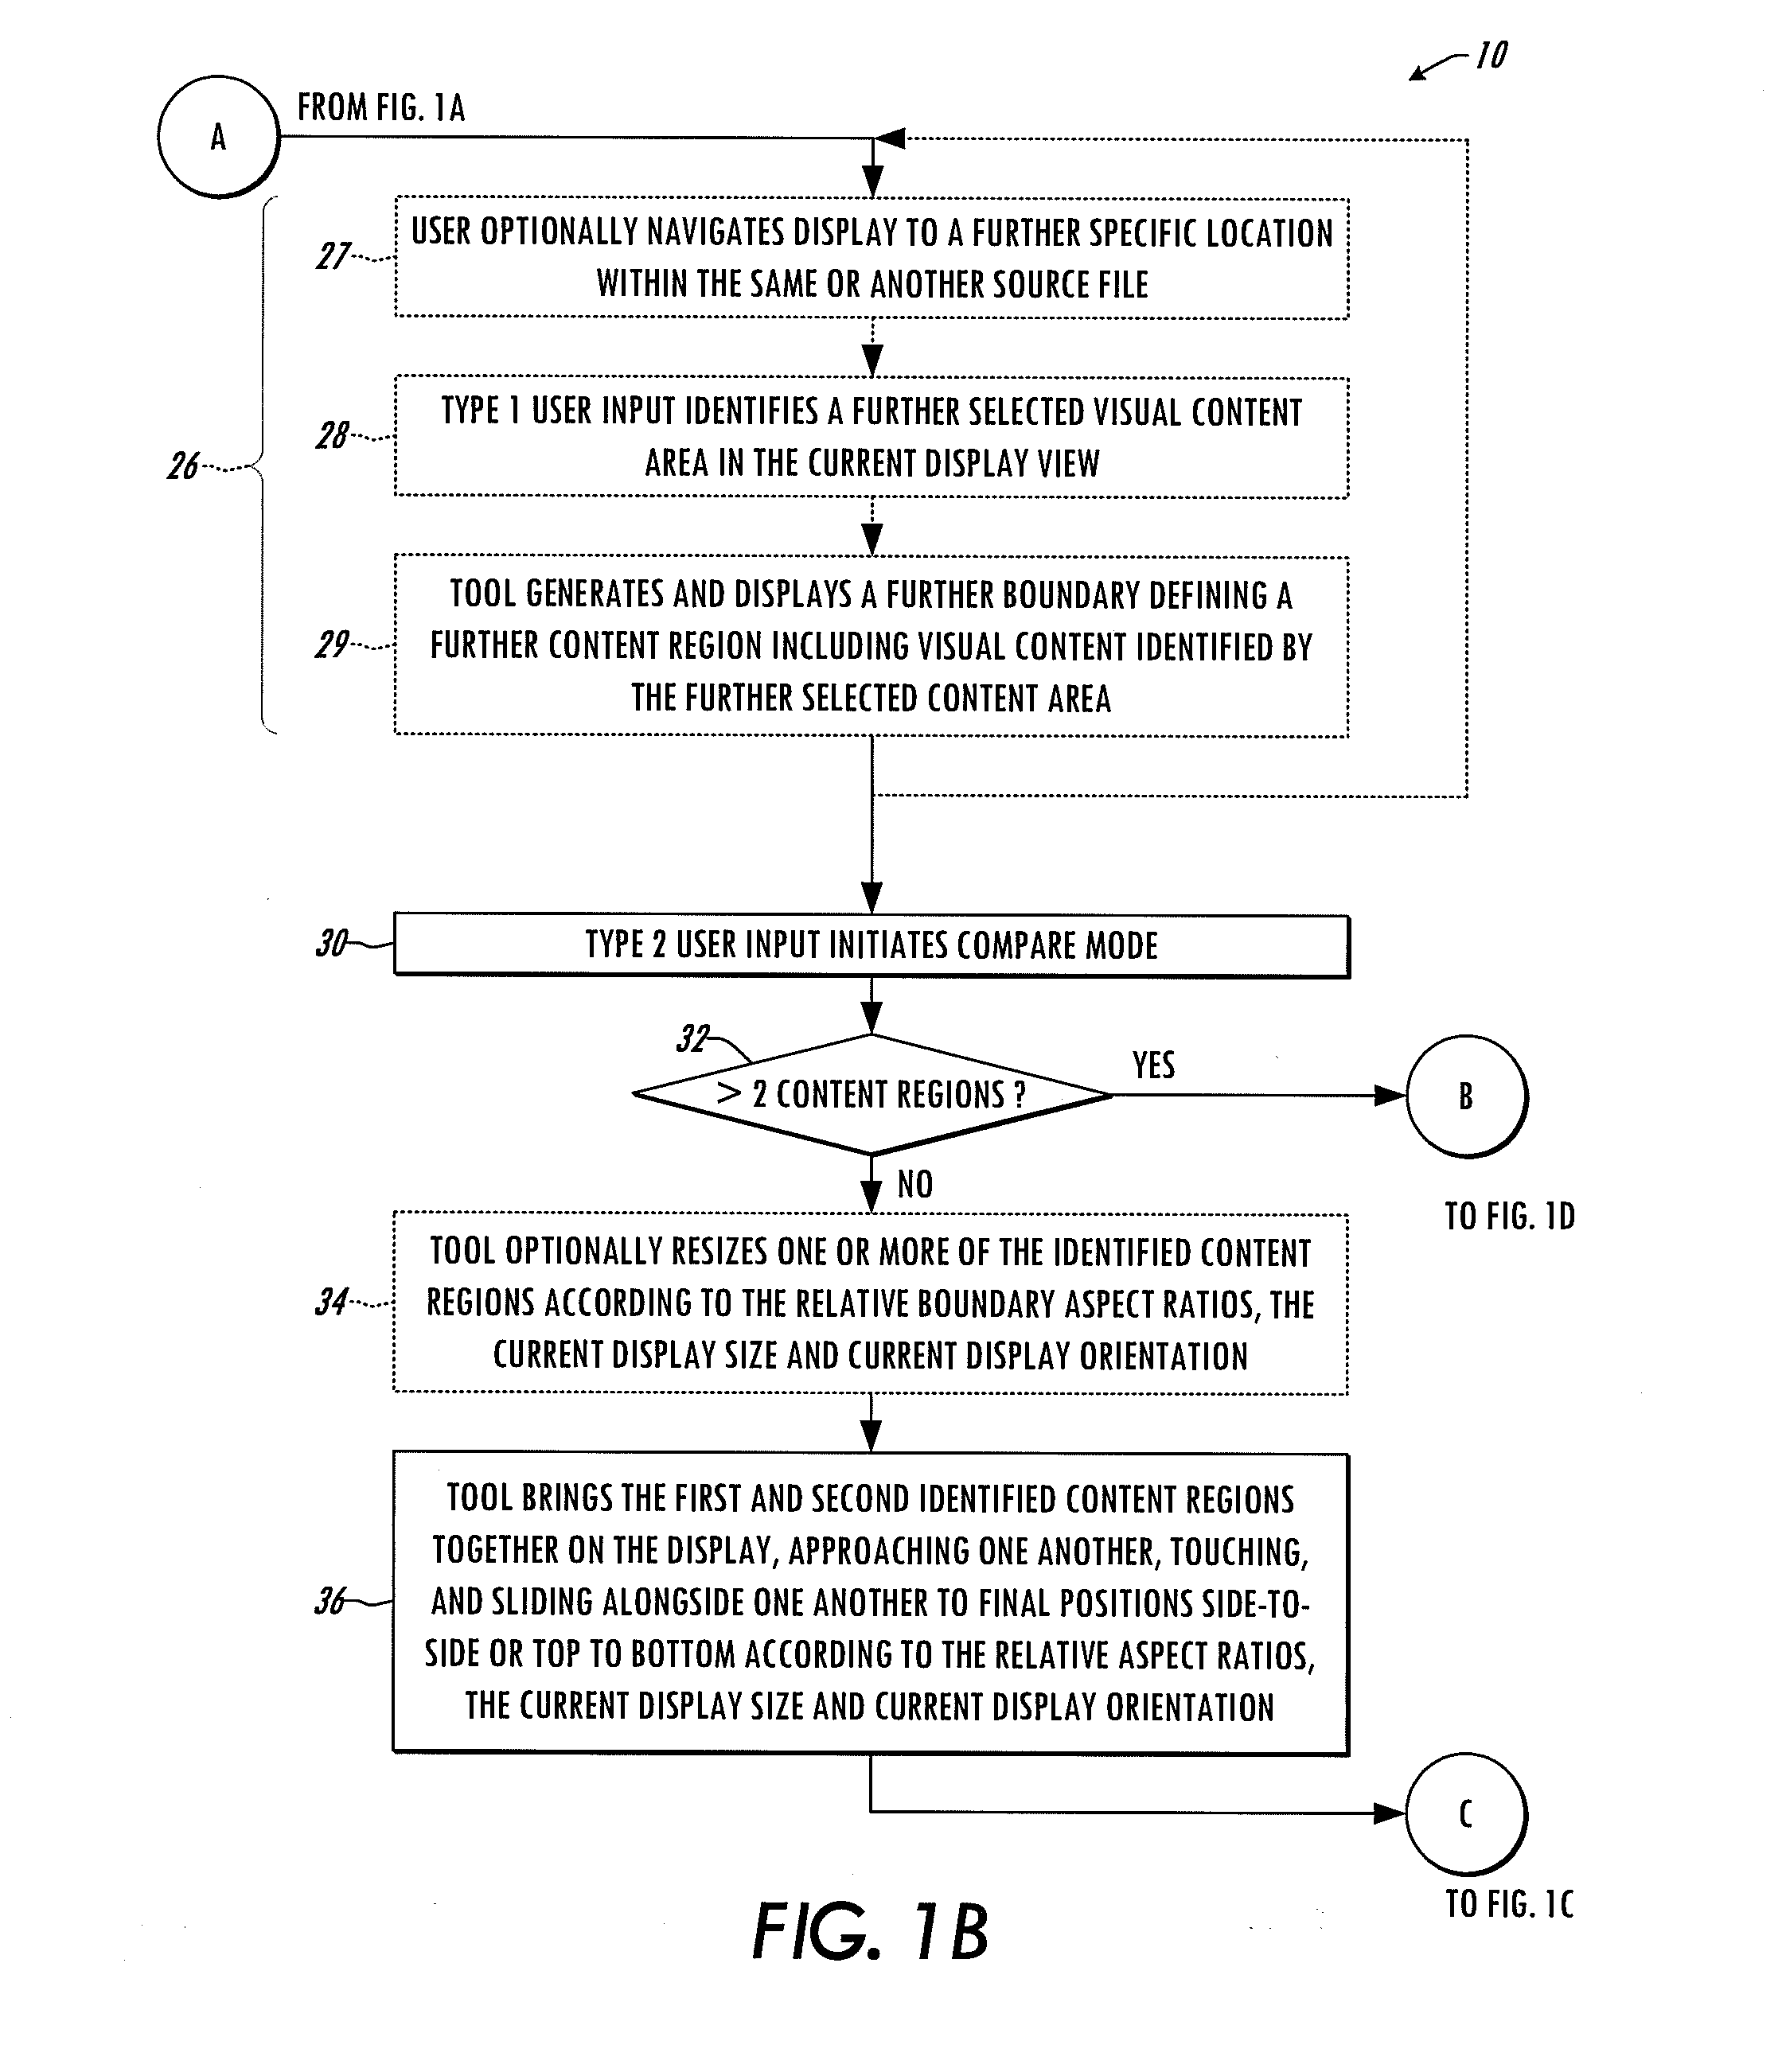 Electronic content visual comparison apparatus and method